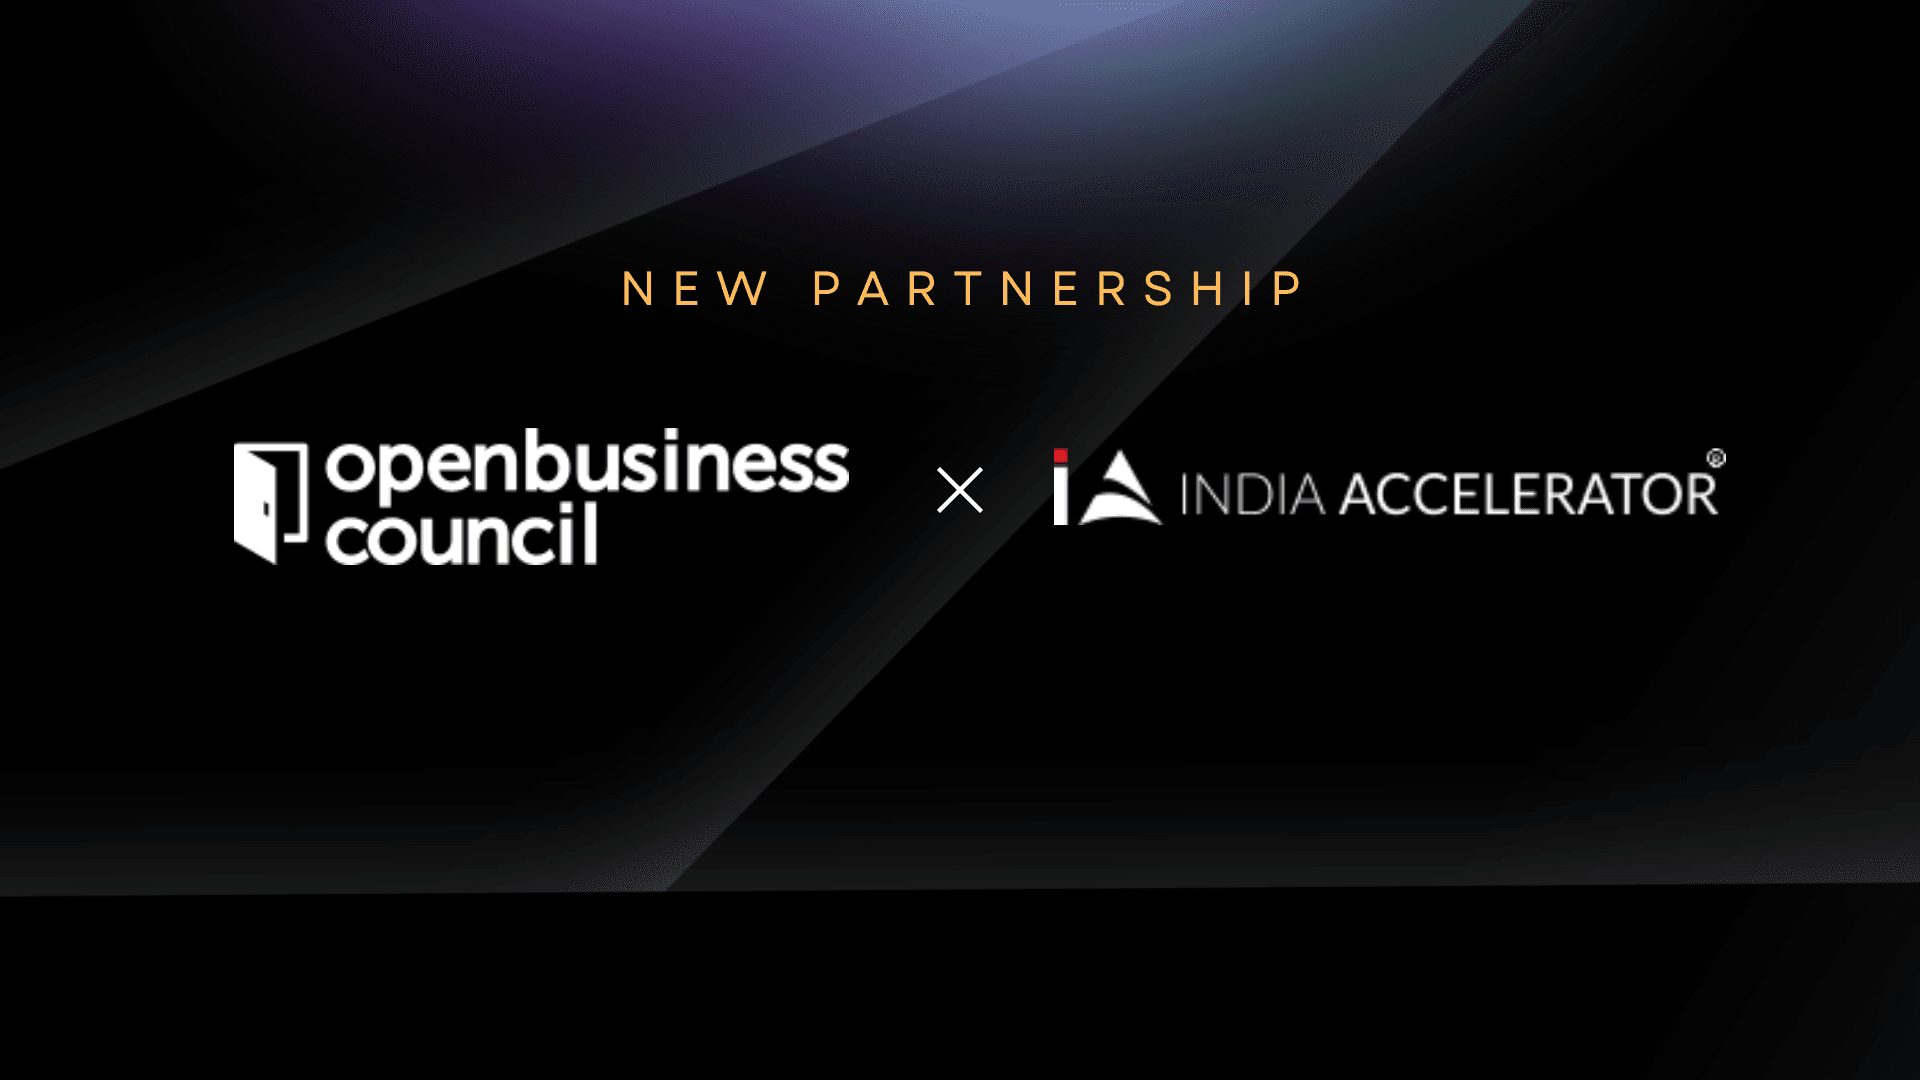 India Accelerator partners with openbusinesscouncil.org to build a global, digital, Blockchain-based certification for its members and onboard them in its international digital trade corridors